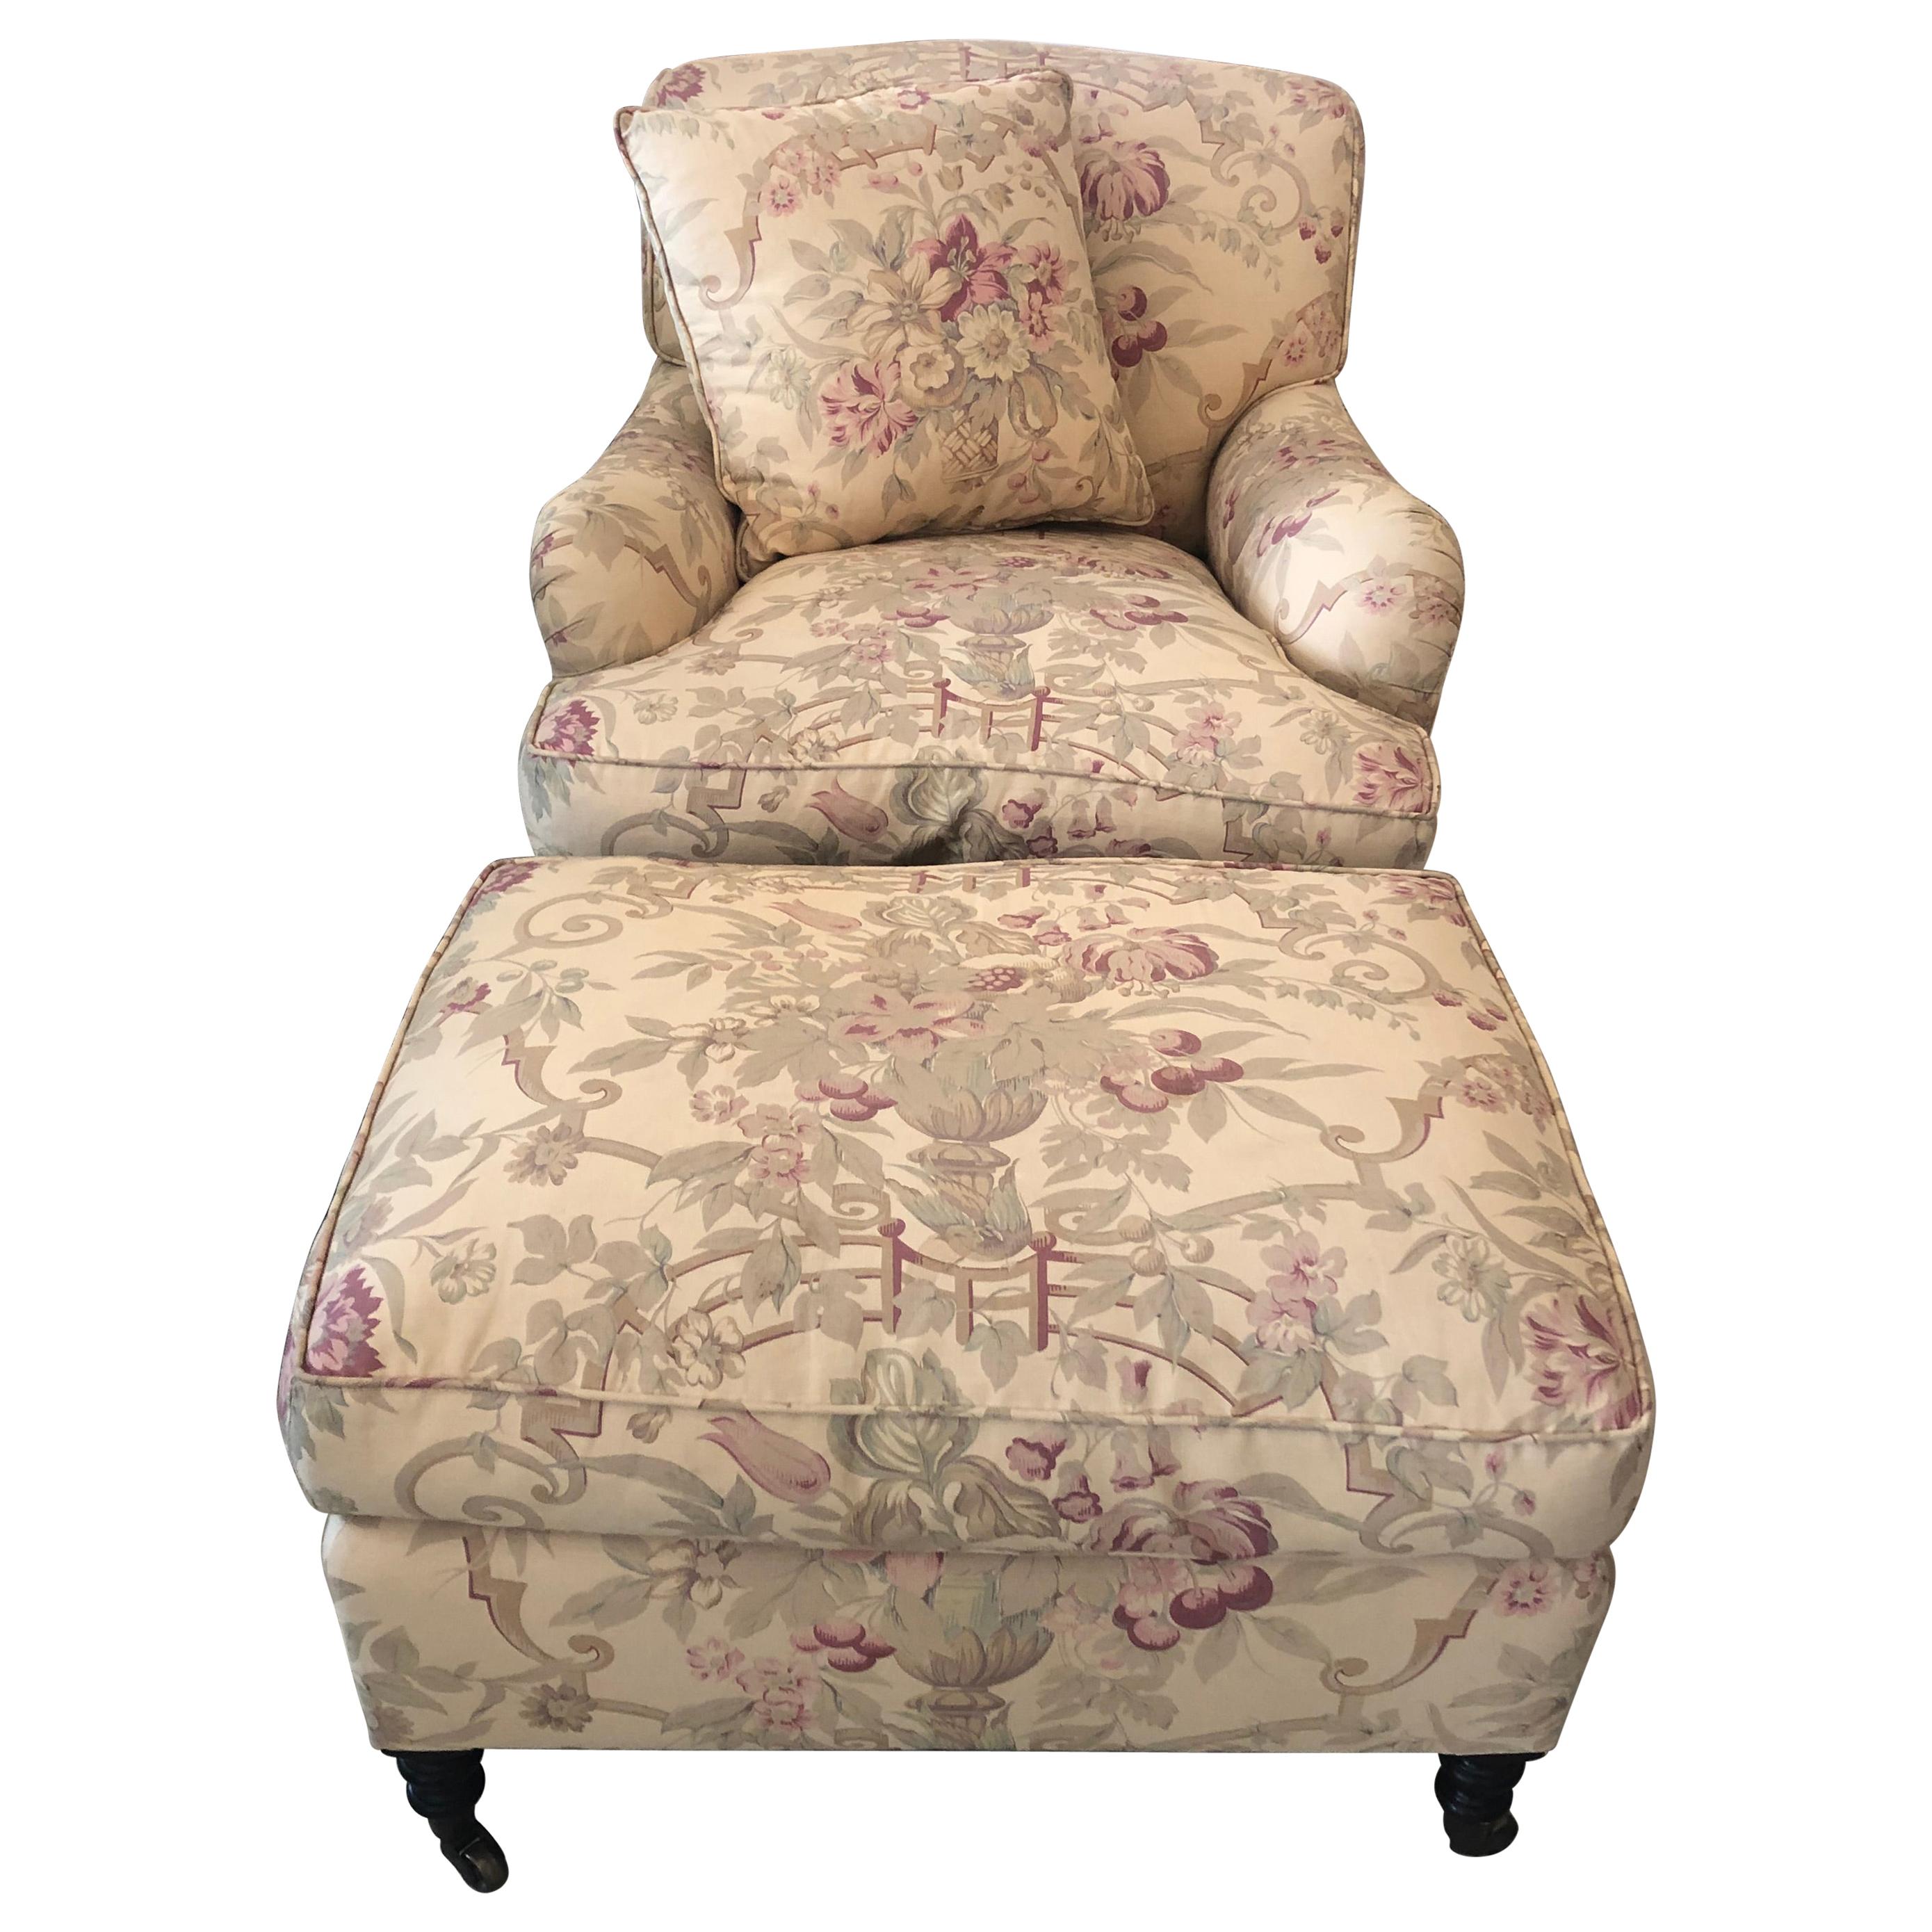 Classic George Smith Large Club Chair and Ottoman in Gollut Pattern Upholstery